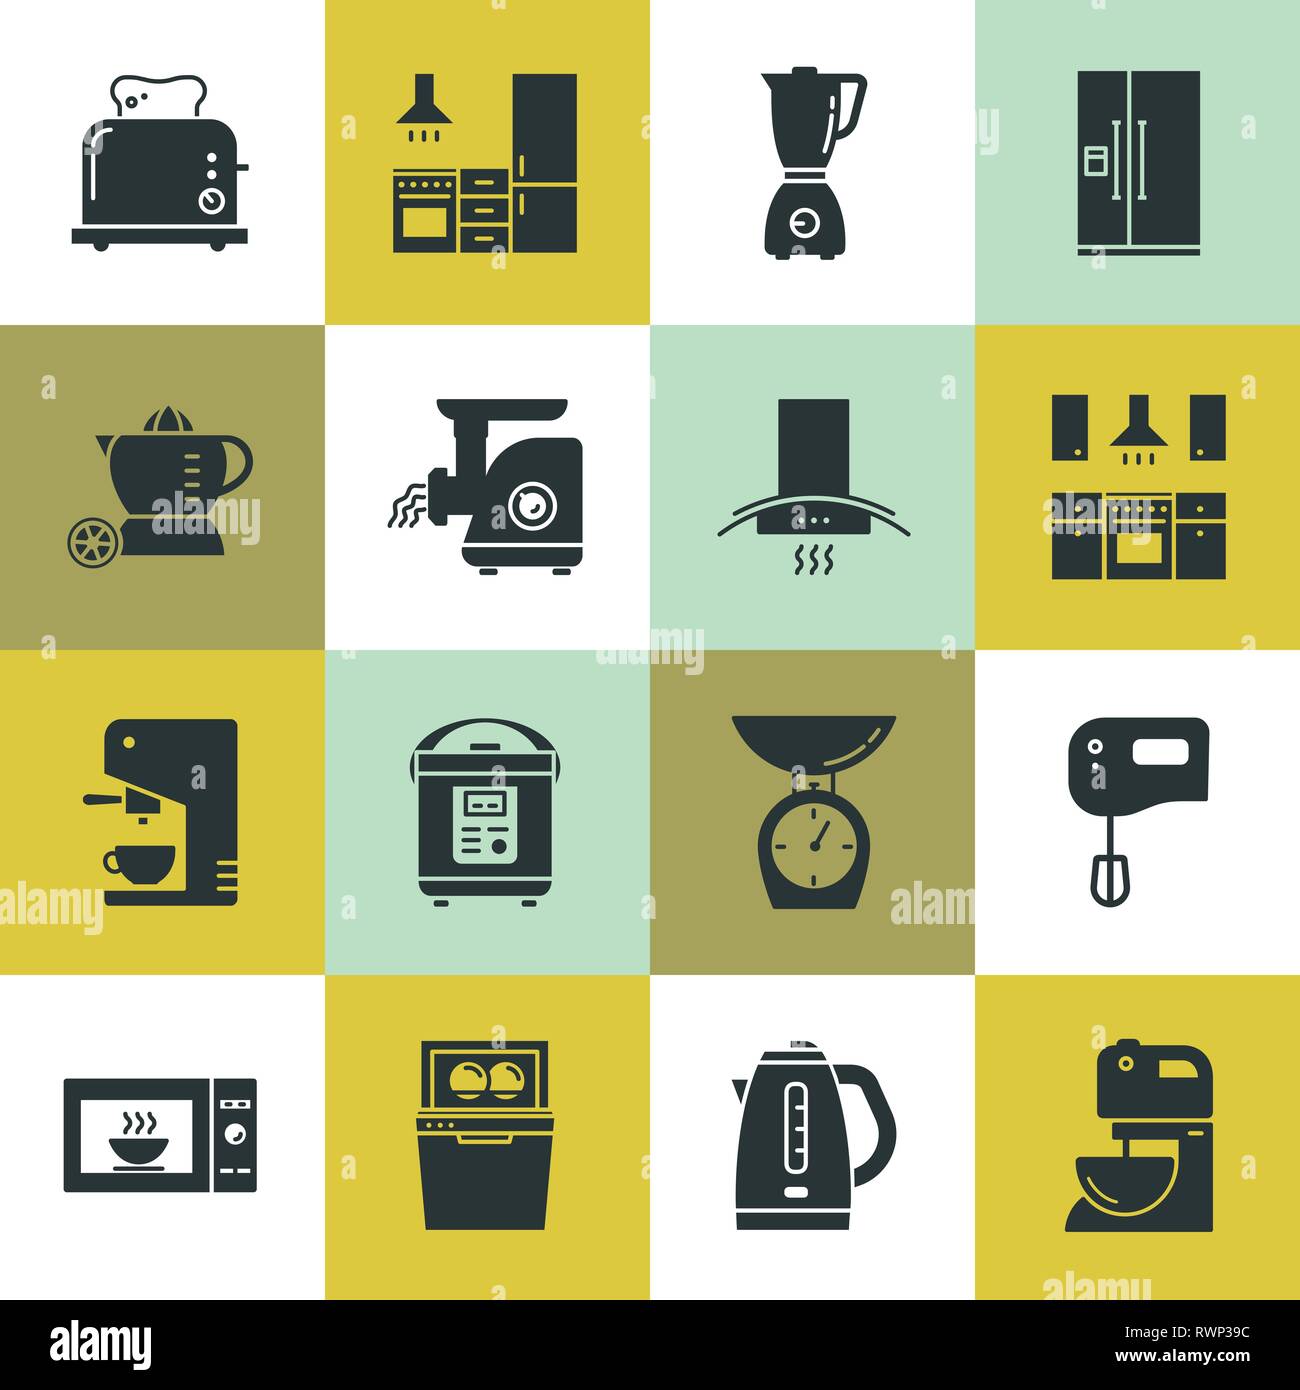 Set of clean icons featuring various kitchen utensils and cooking related objects. Stock Vector